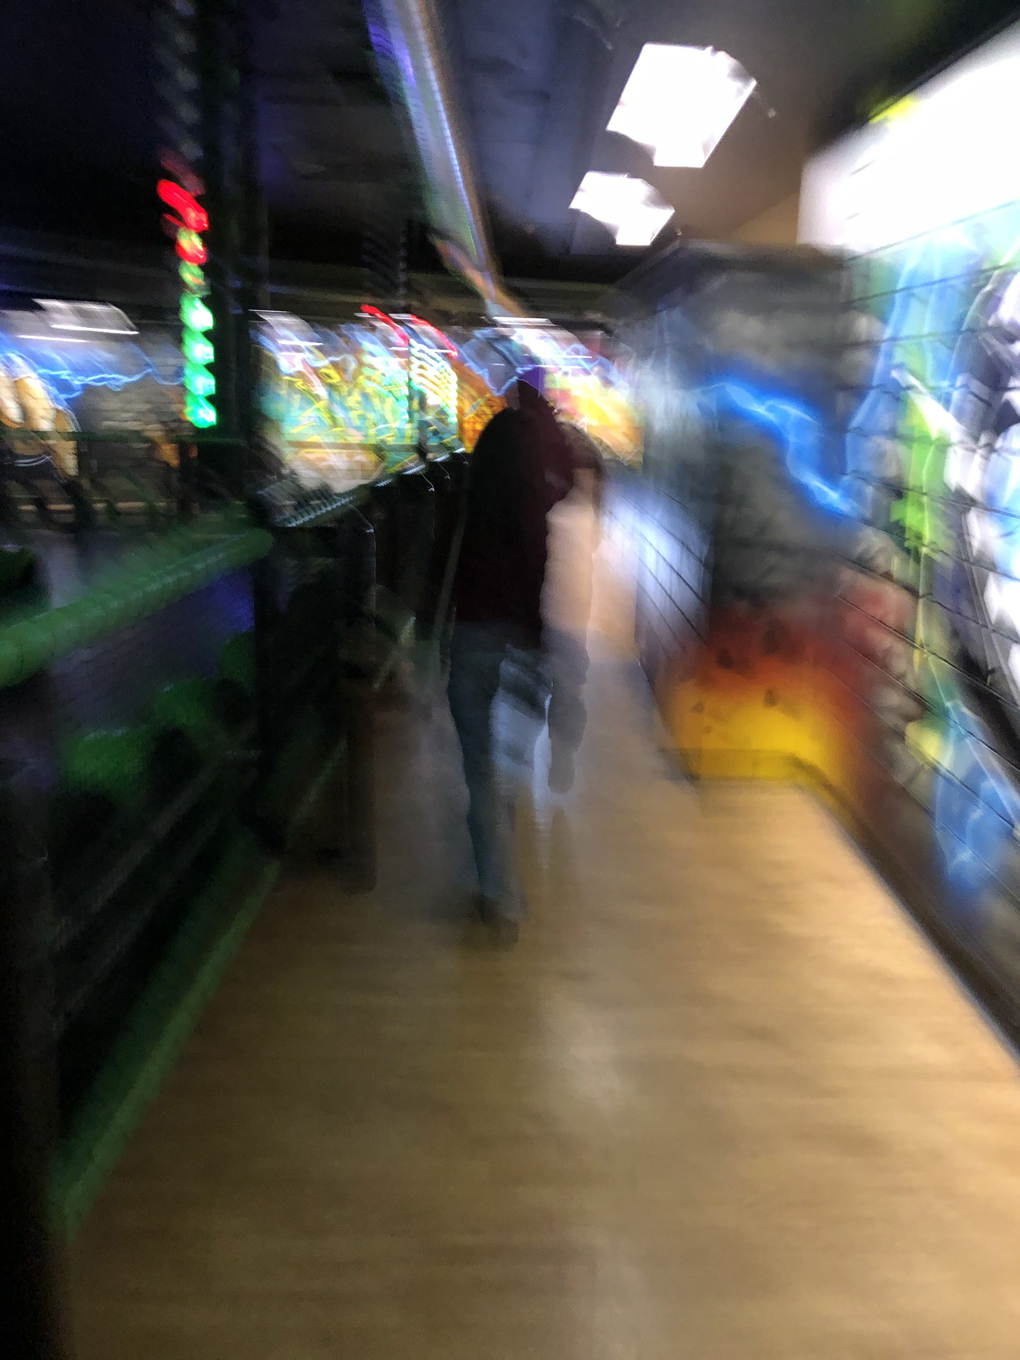 A blurry photo of the inside of a kids' play centre